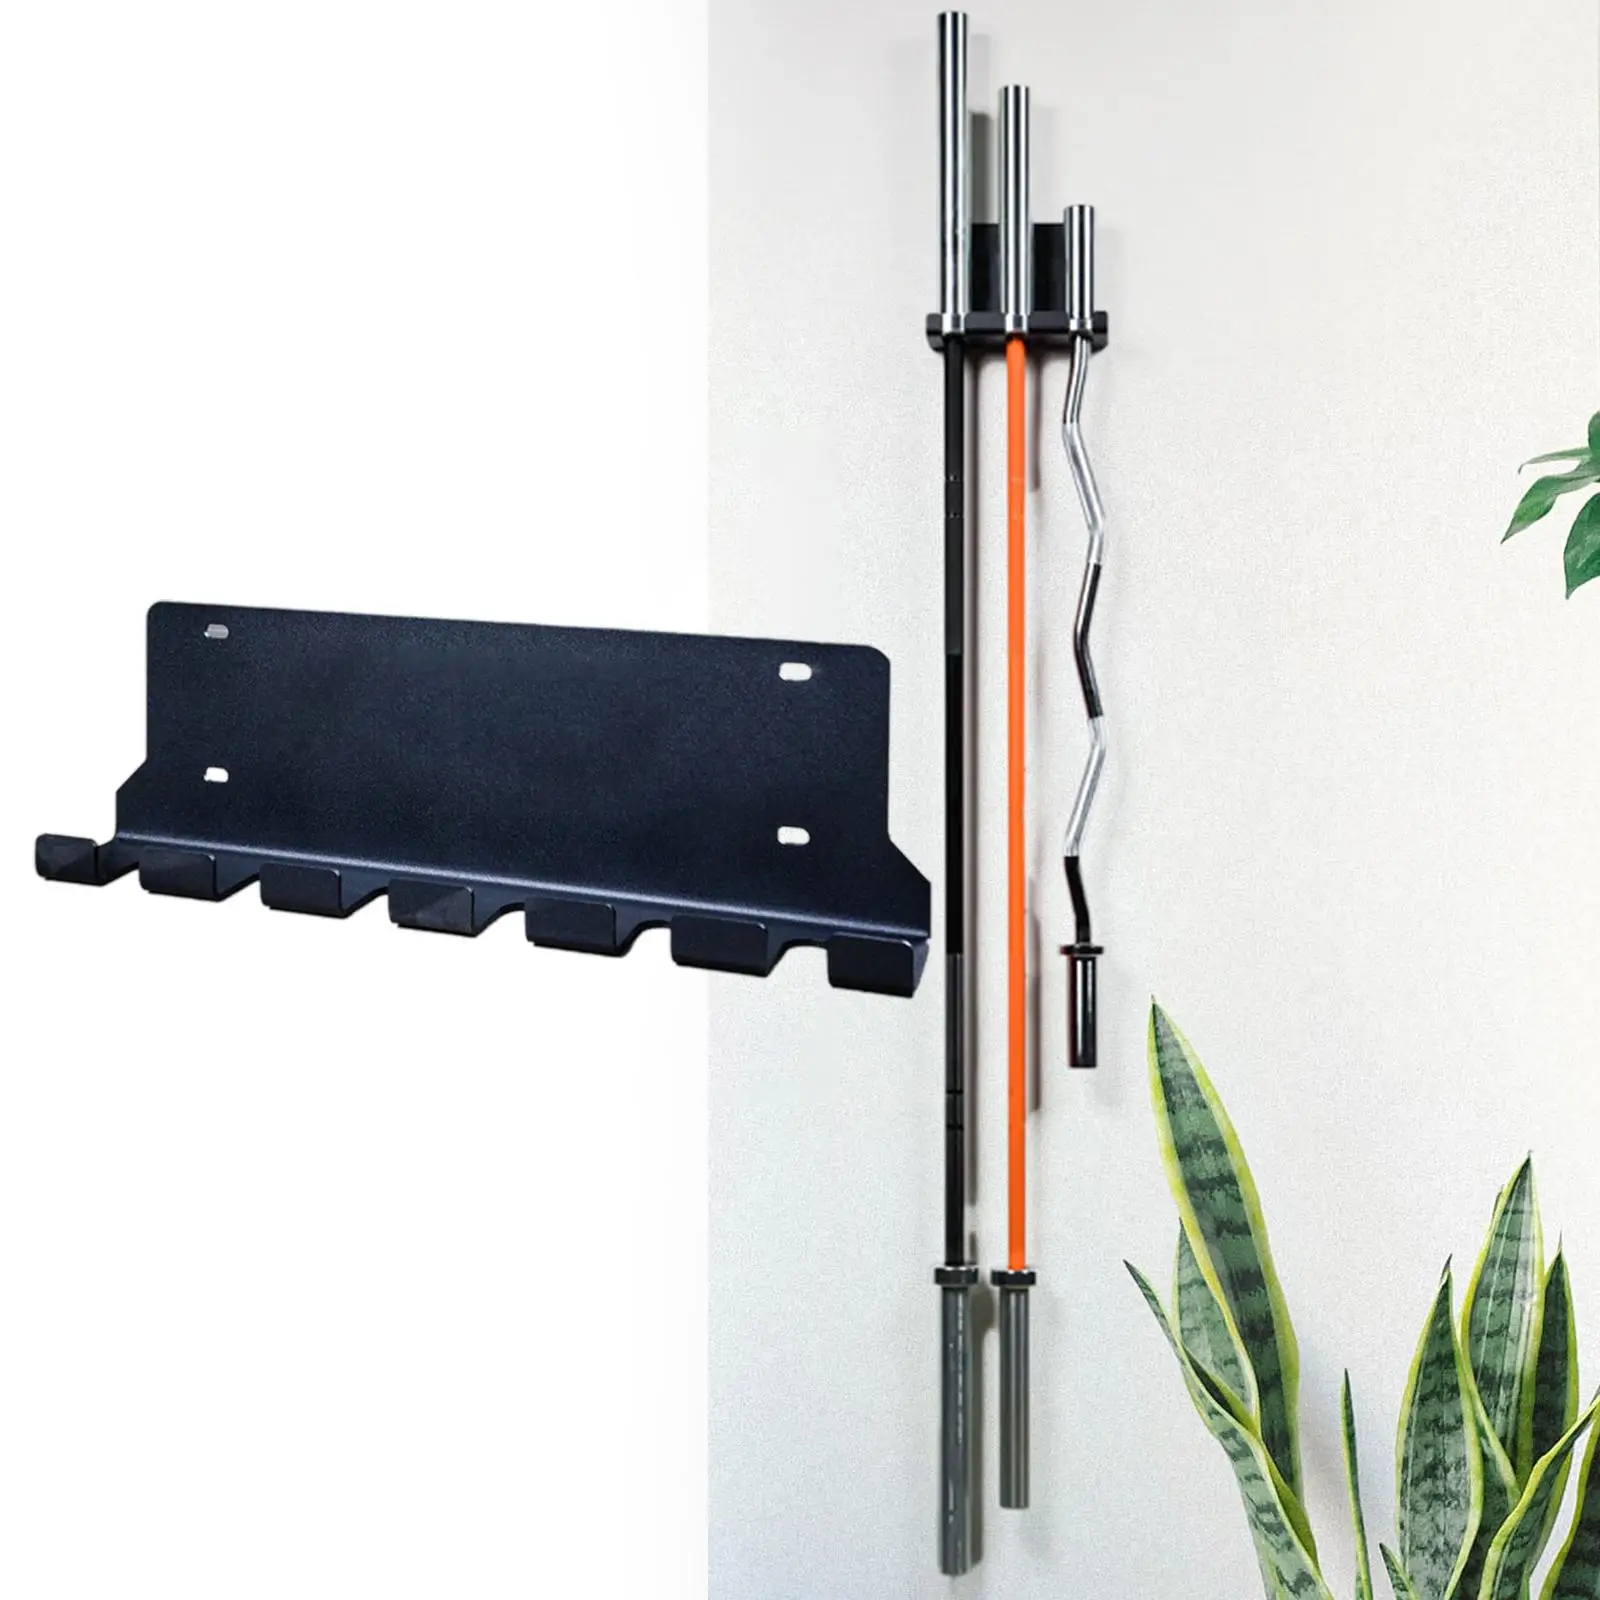 Barbell Storage Holder Rack Vertical bars Holder Storage Wall Mount Space Saving Hanger for Gym Fitness Home Accessories